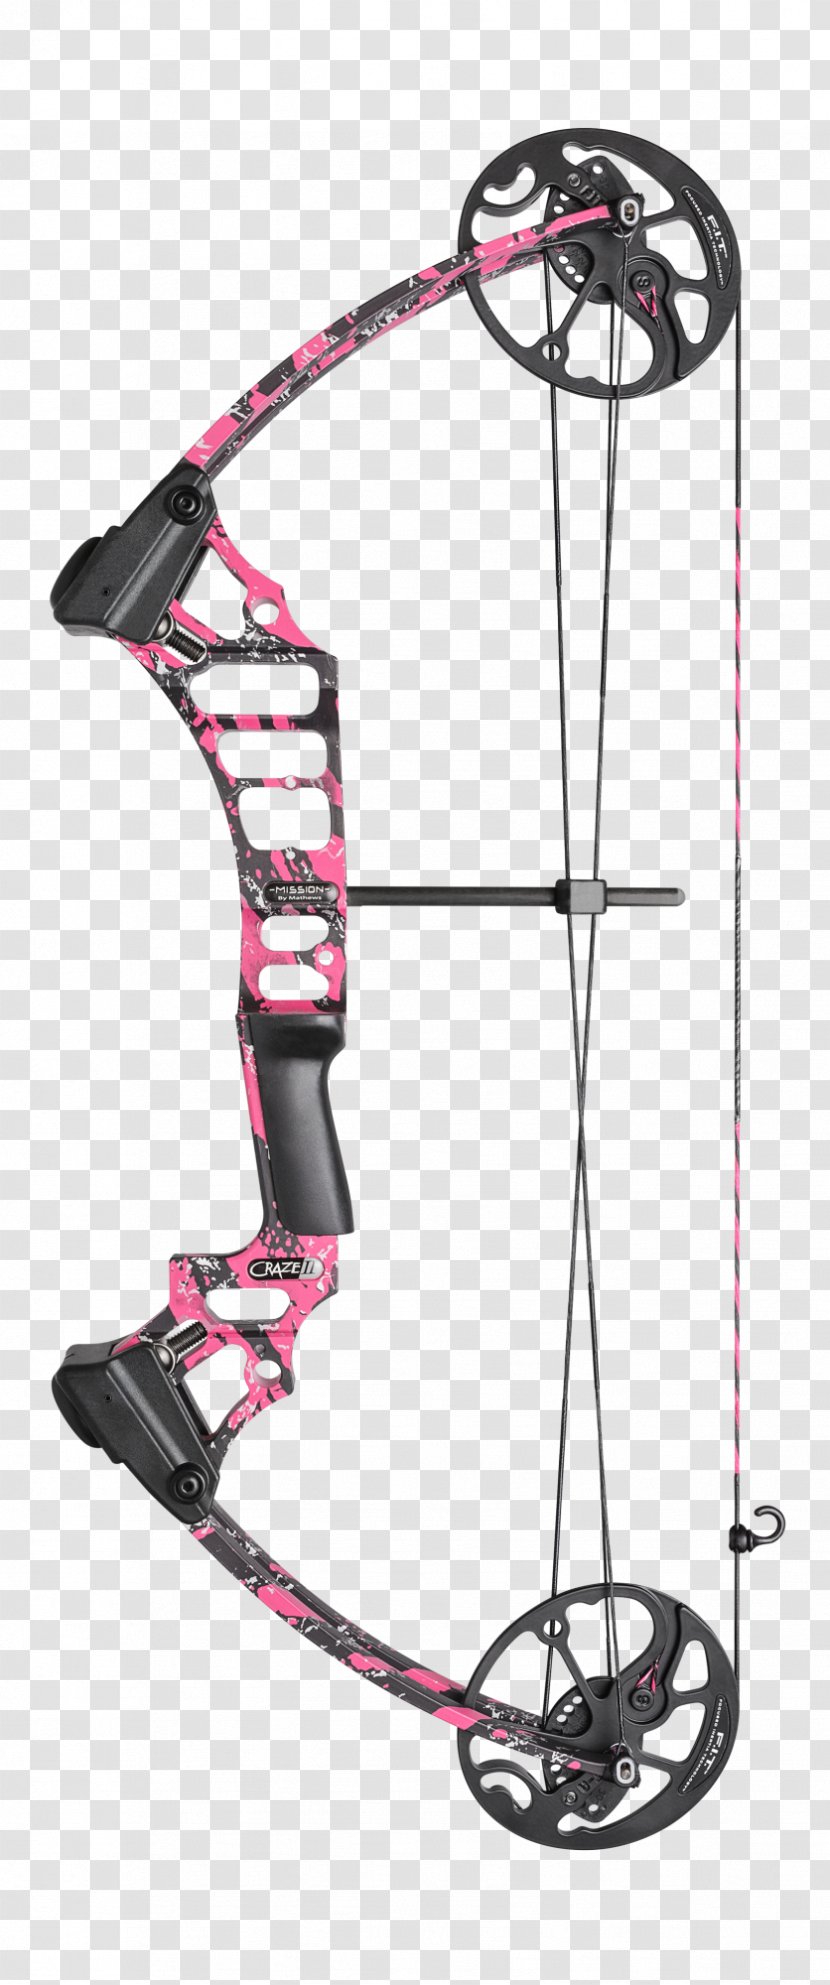 Archery Compound Bows Hunting Bow And Arrow - Pink Transparent PNG